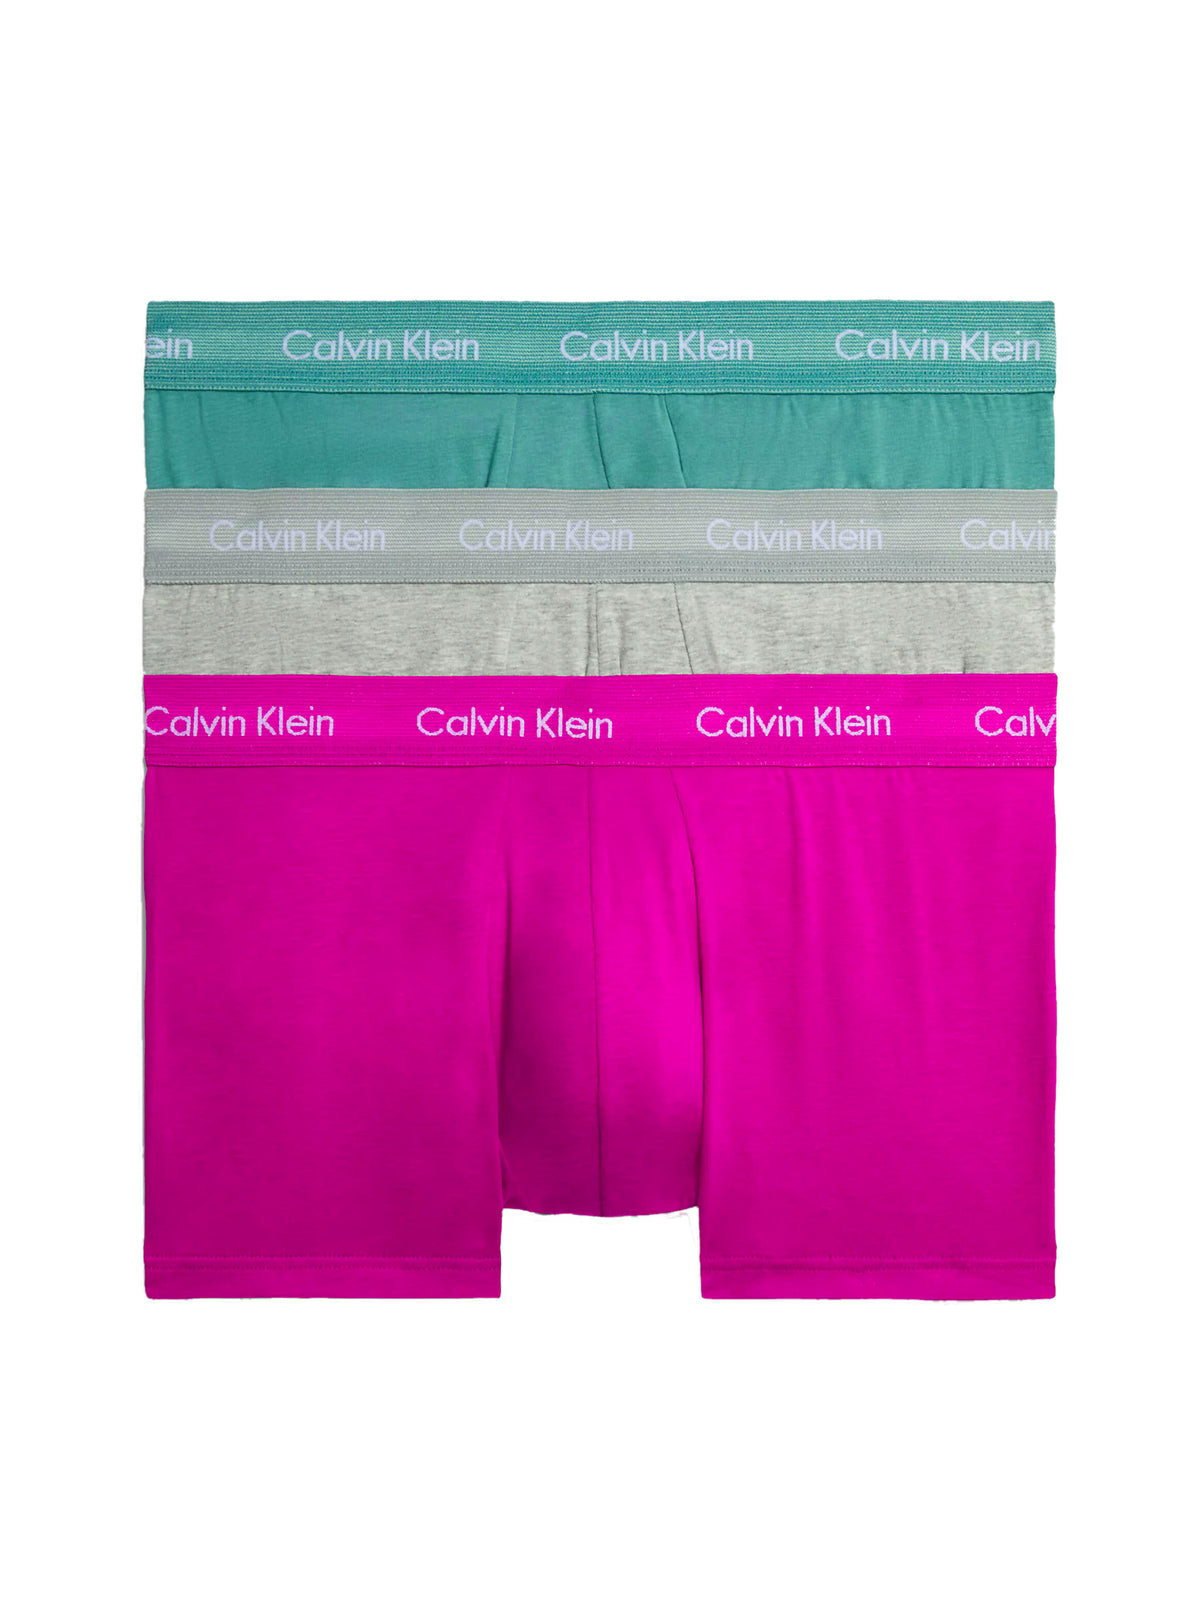 Mens Calvin Klein Boxer Shorts Low Rise Trunks 3 Pack, 01, U2664G, Wild Aster, GRY HTHR, Arctic Green